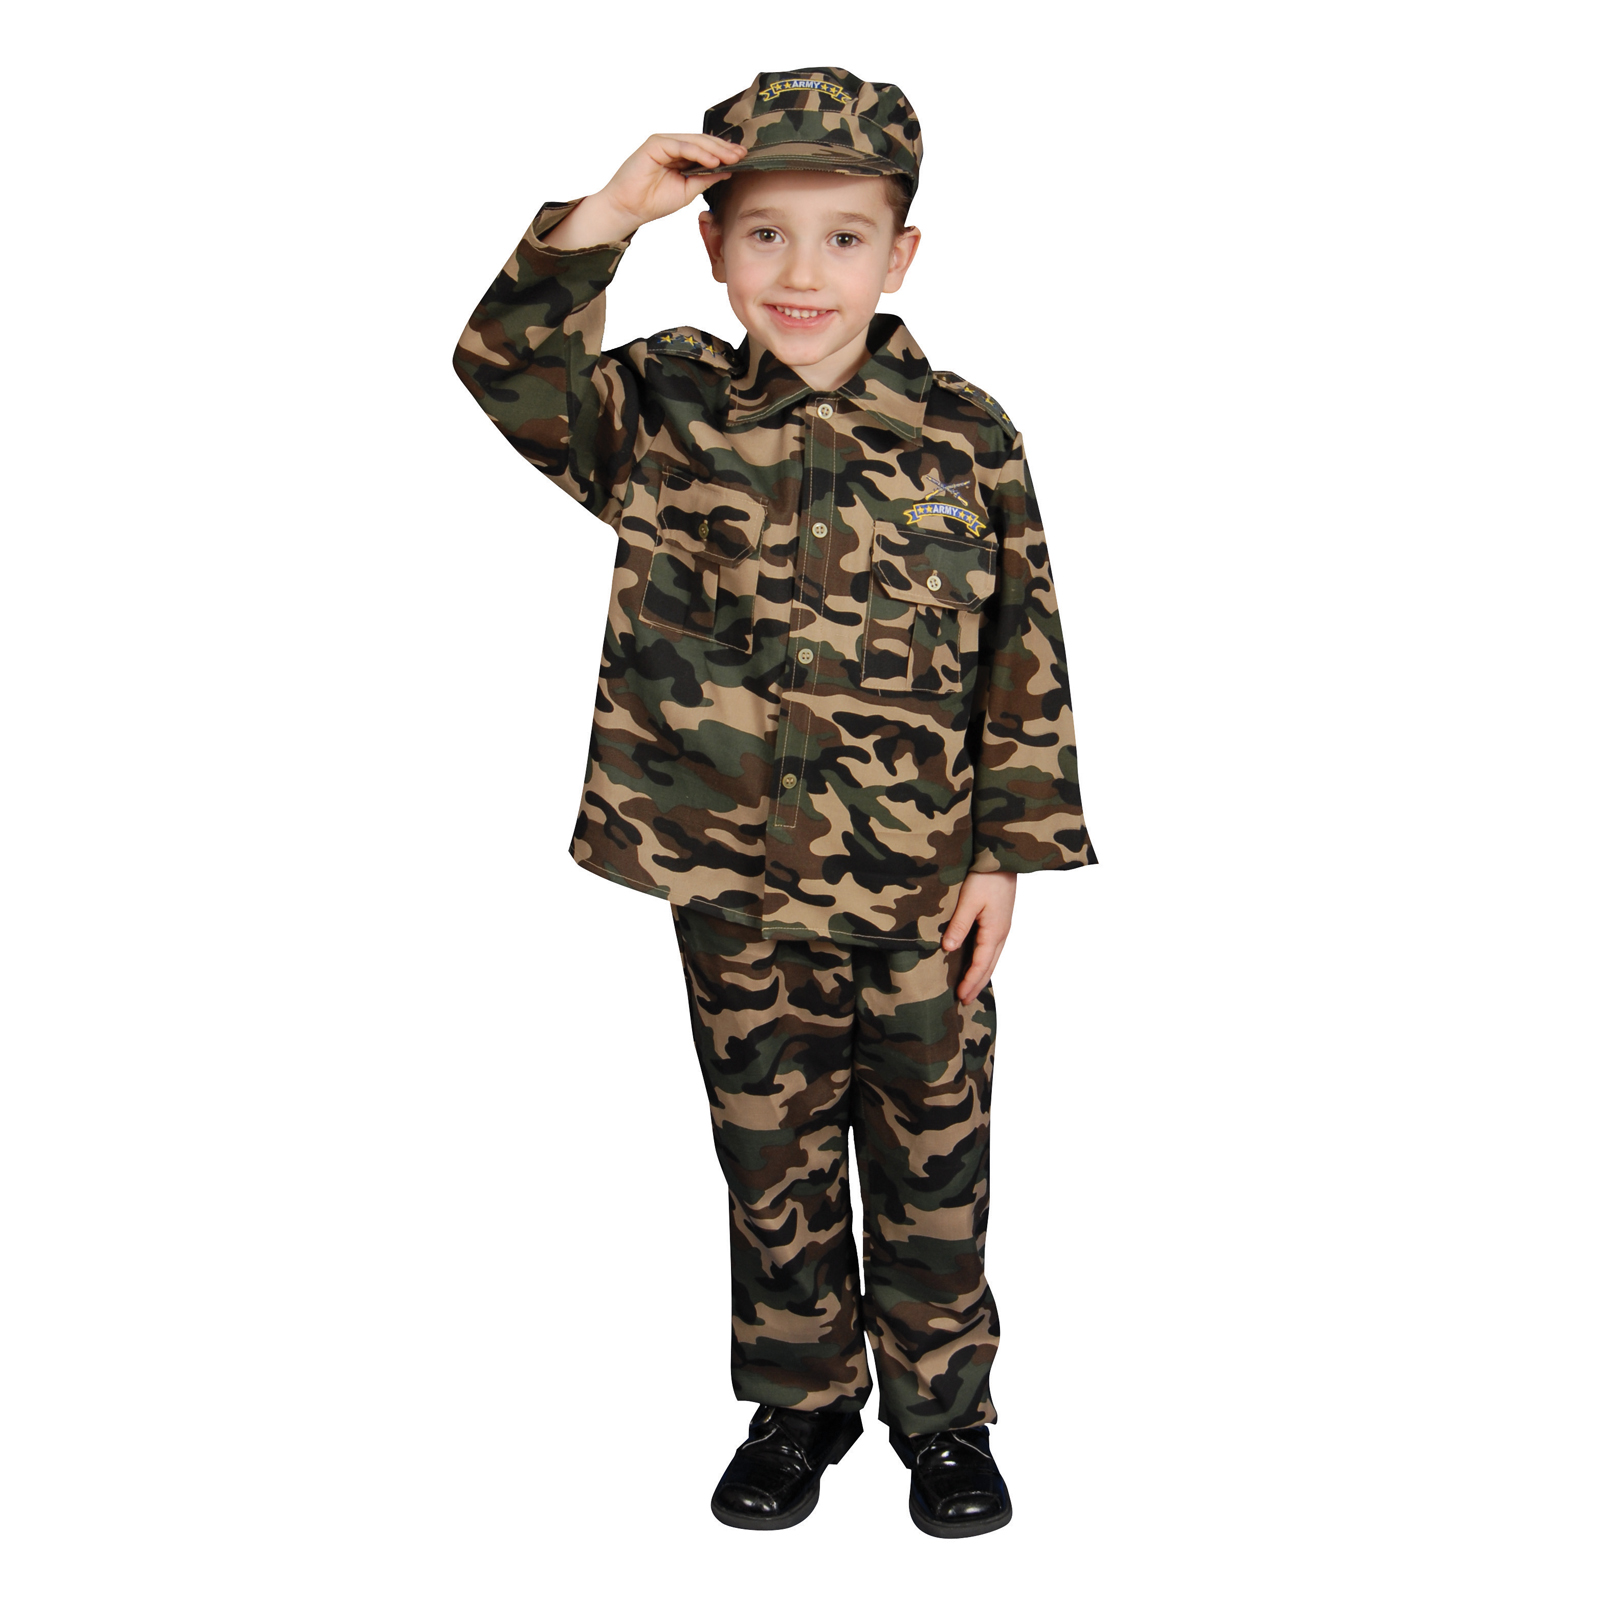 Toddler Army Costume Size: 2T-4T